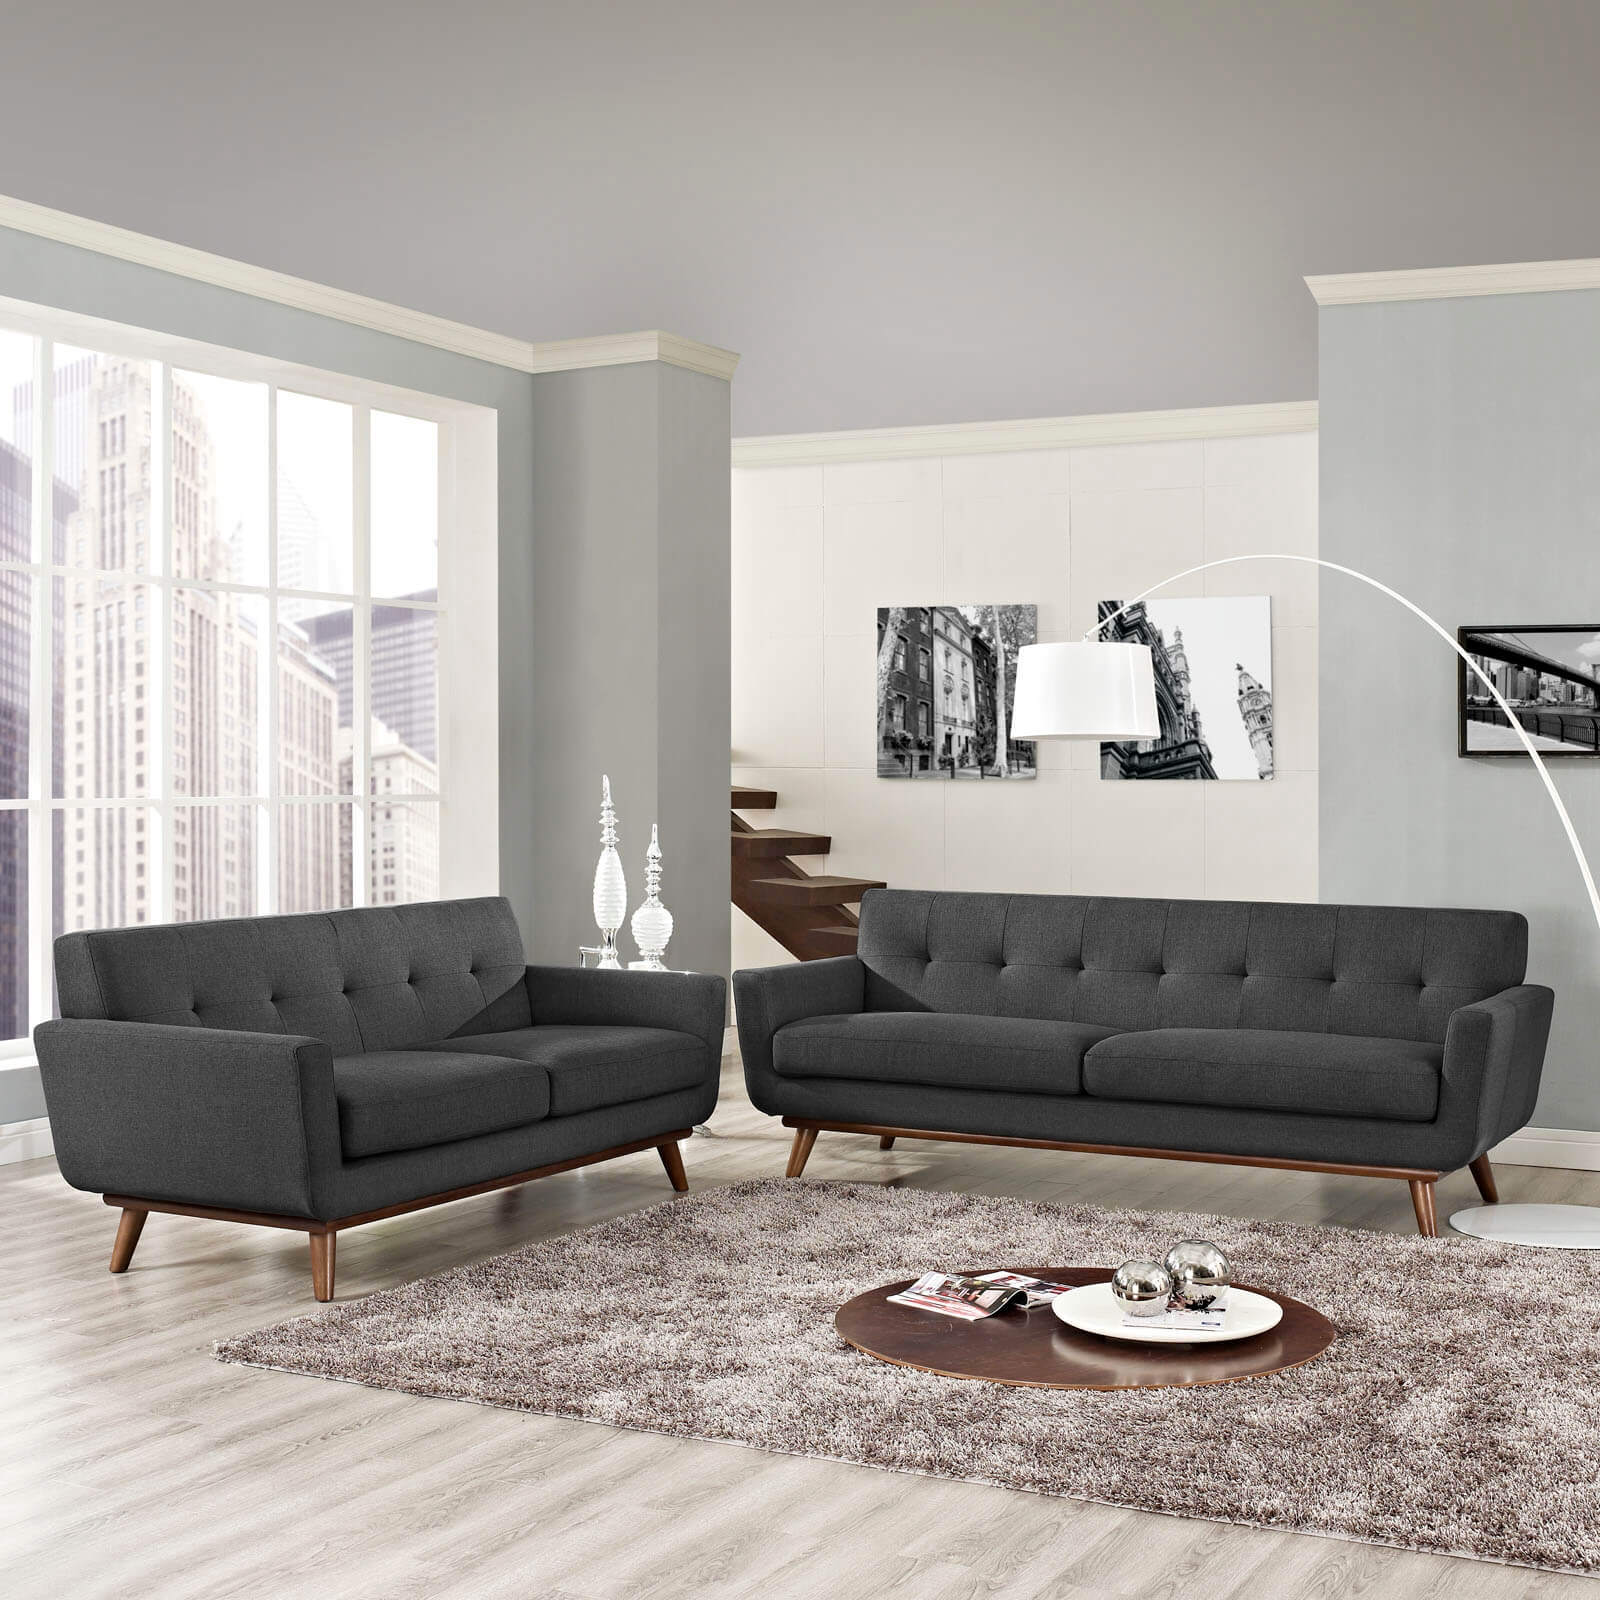 Engage Living Room Set (Gray) - All American Furniture - Buy 4 Less ...